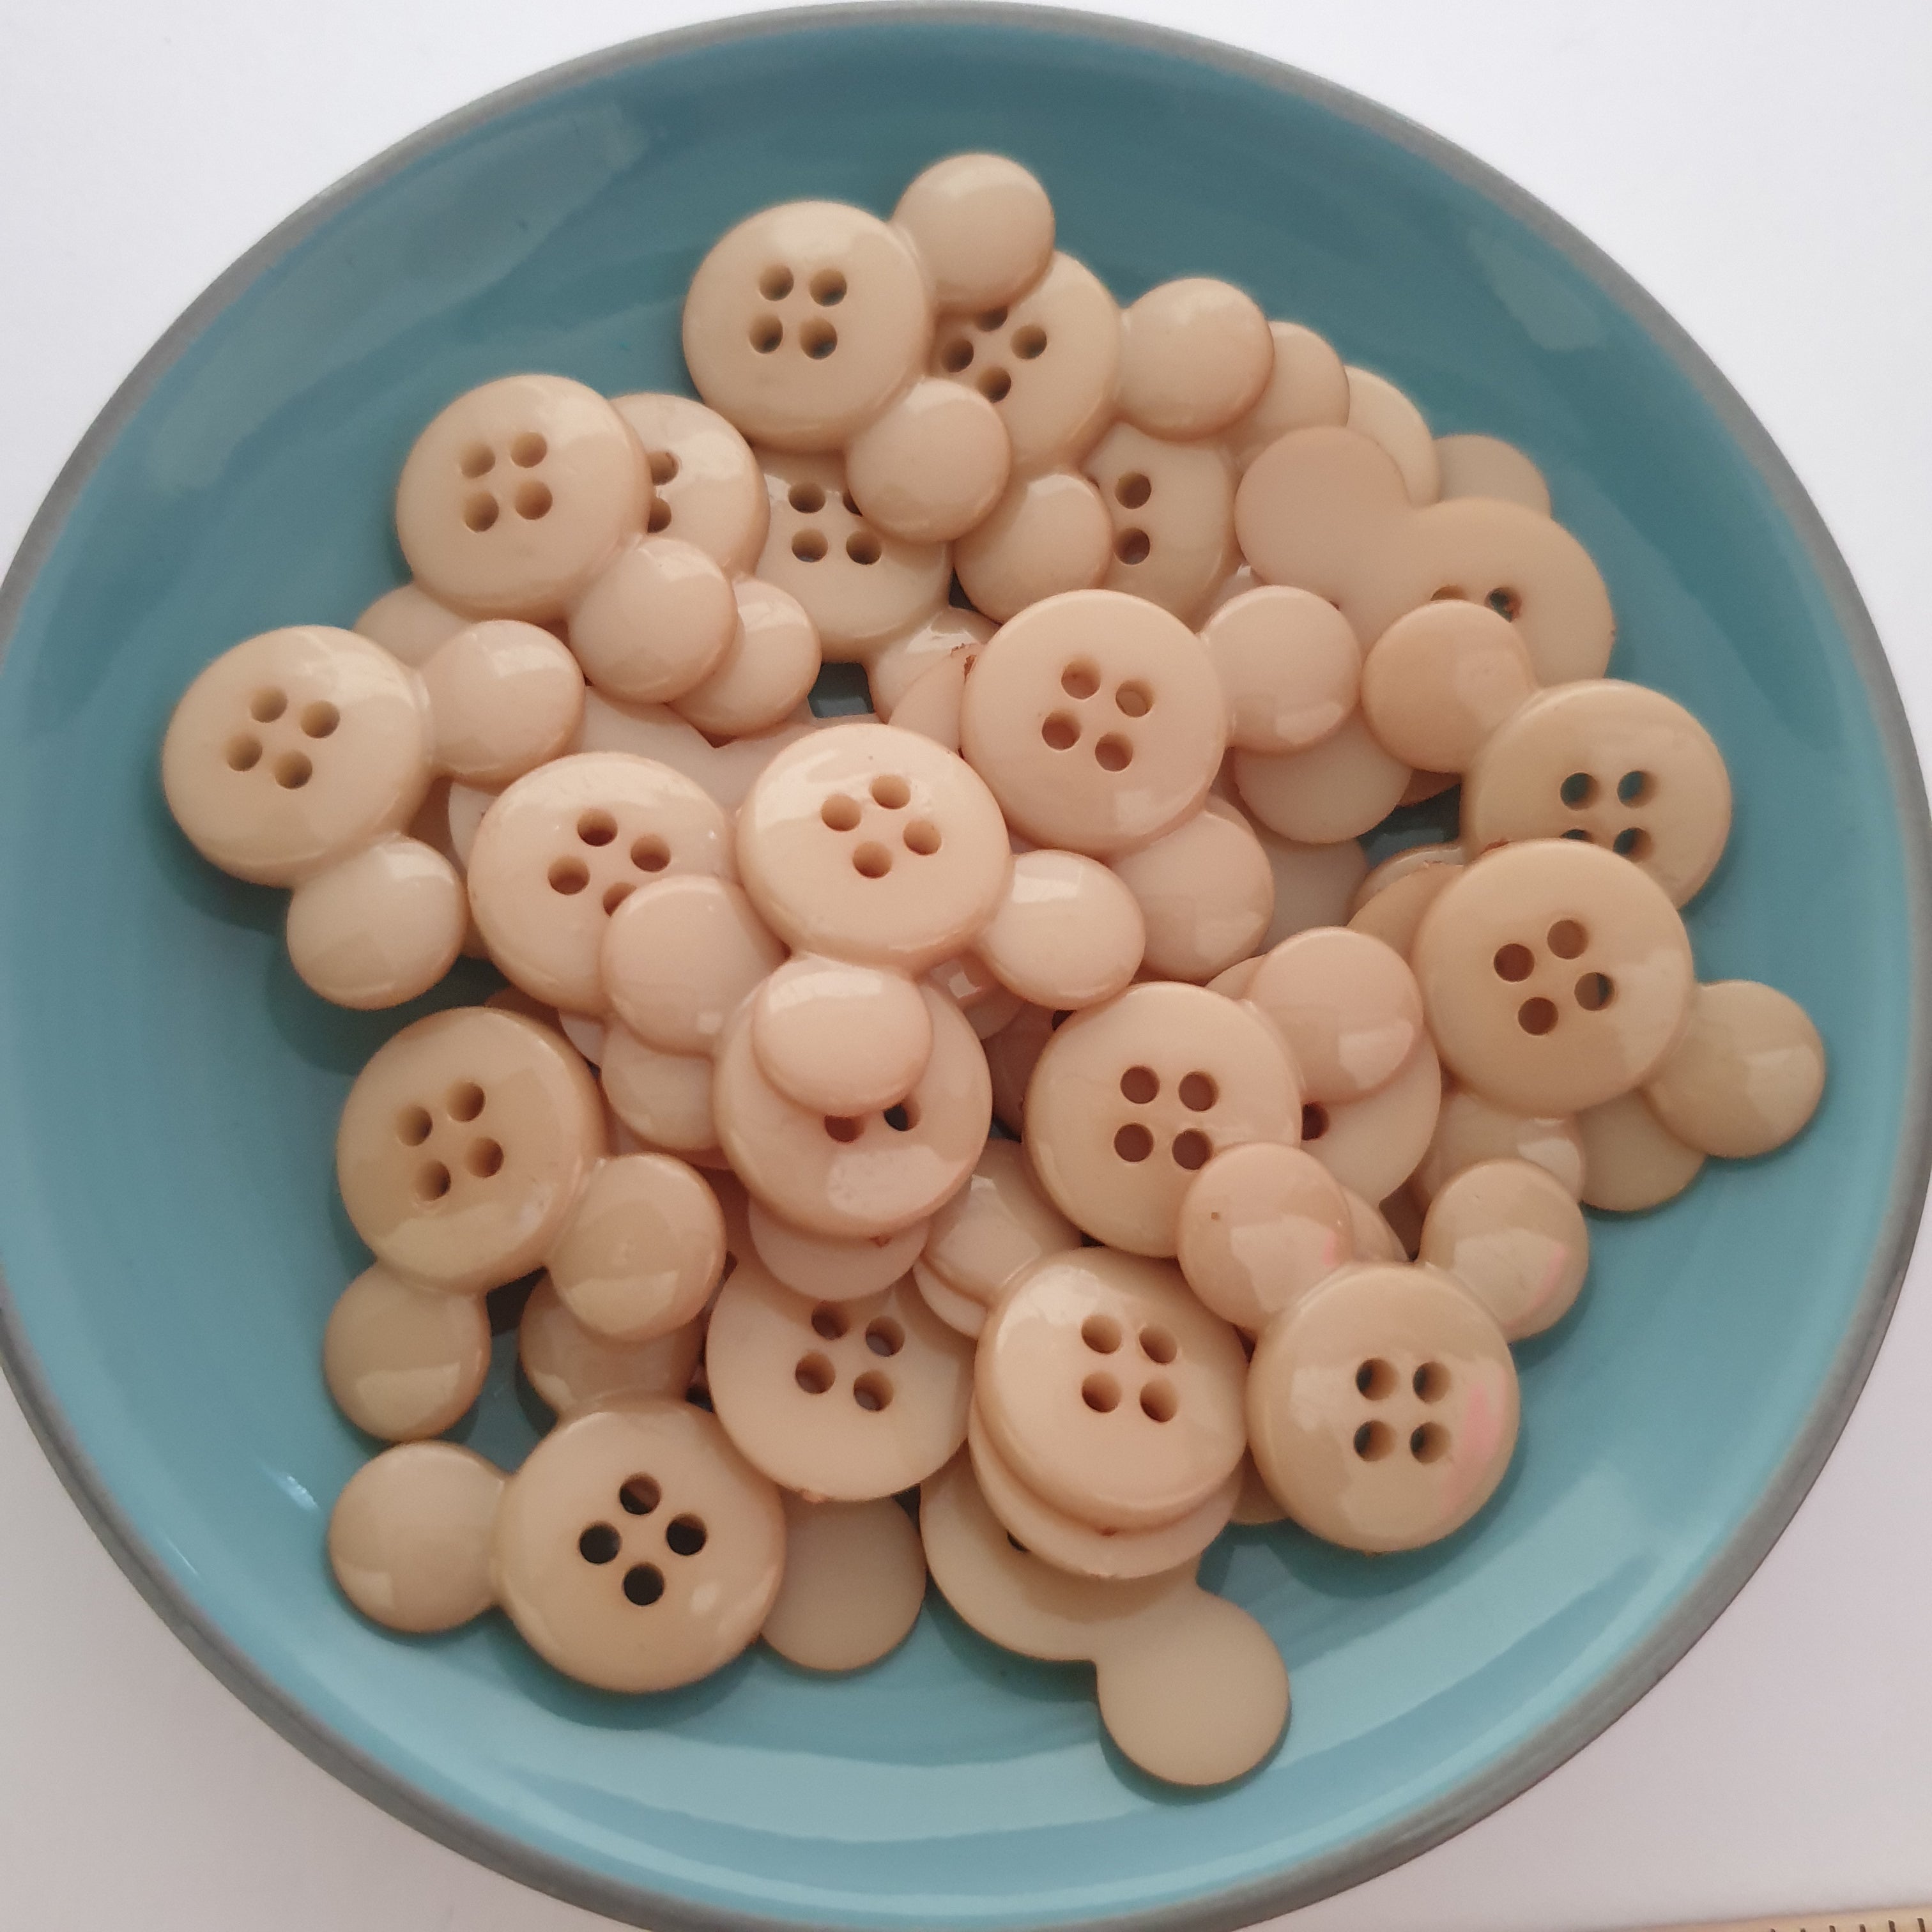 MajorCrafts 34pcs 22mm Beige Brown 4 Holes Mouse Head Shape Resin Sewing Buttons